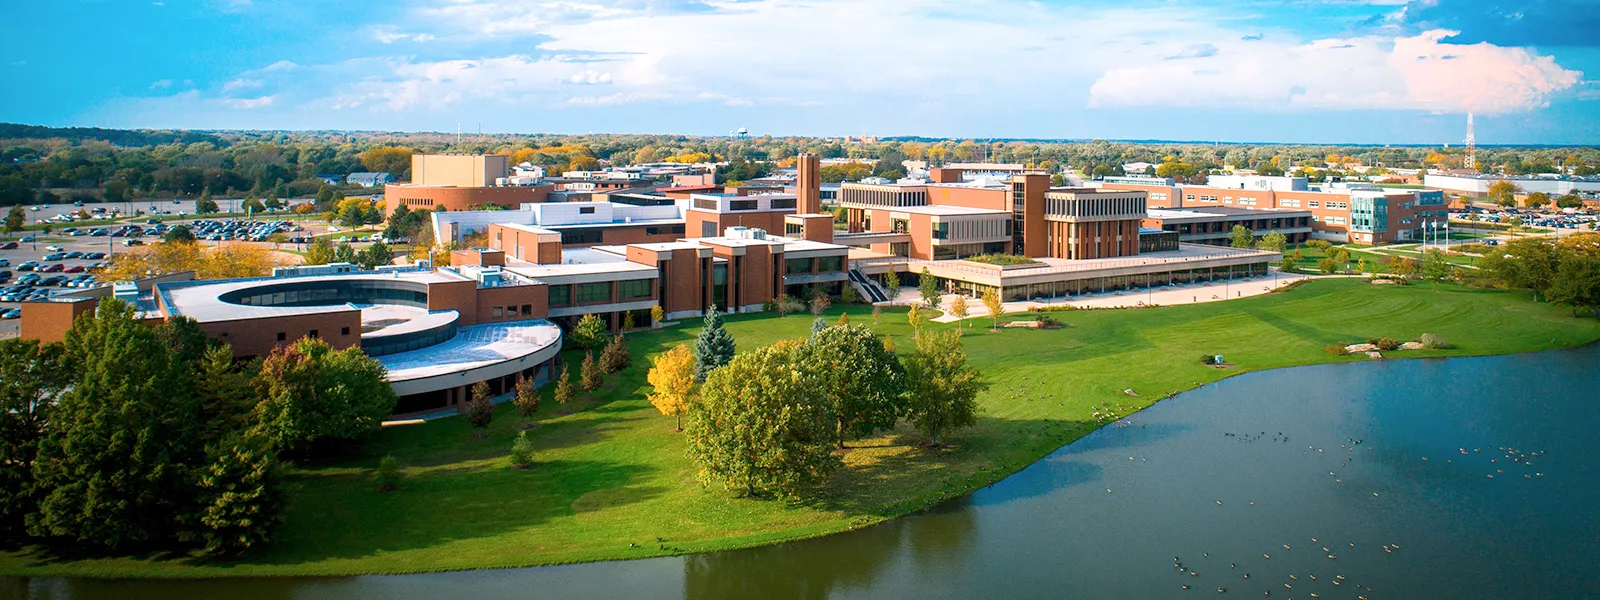 Aerial view of Elgin Community College and Lake Spartan.